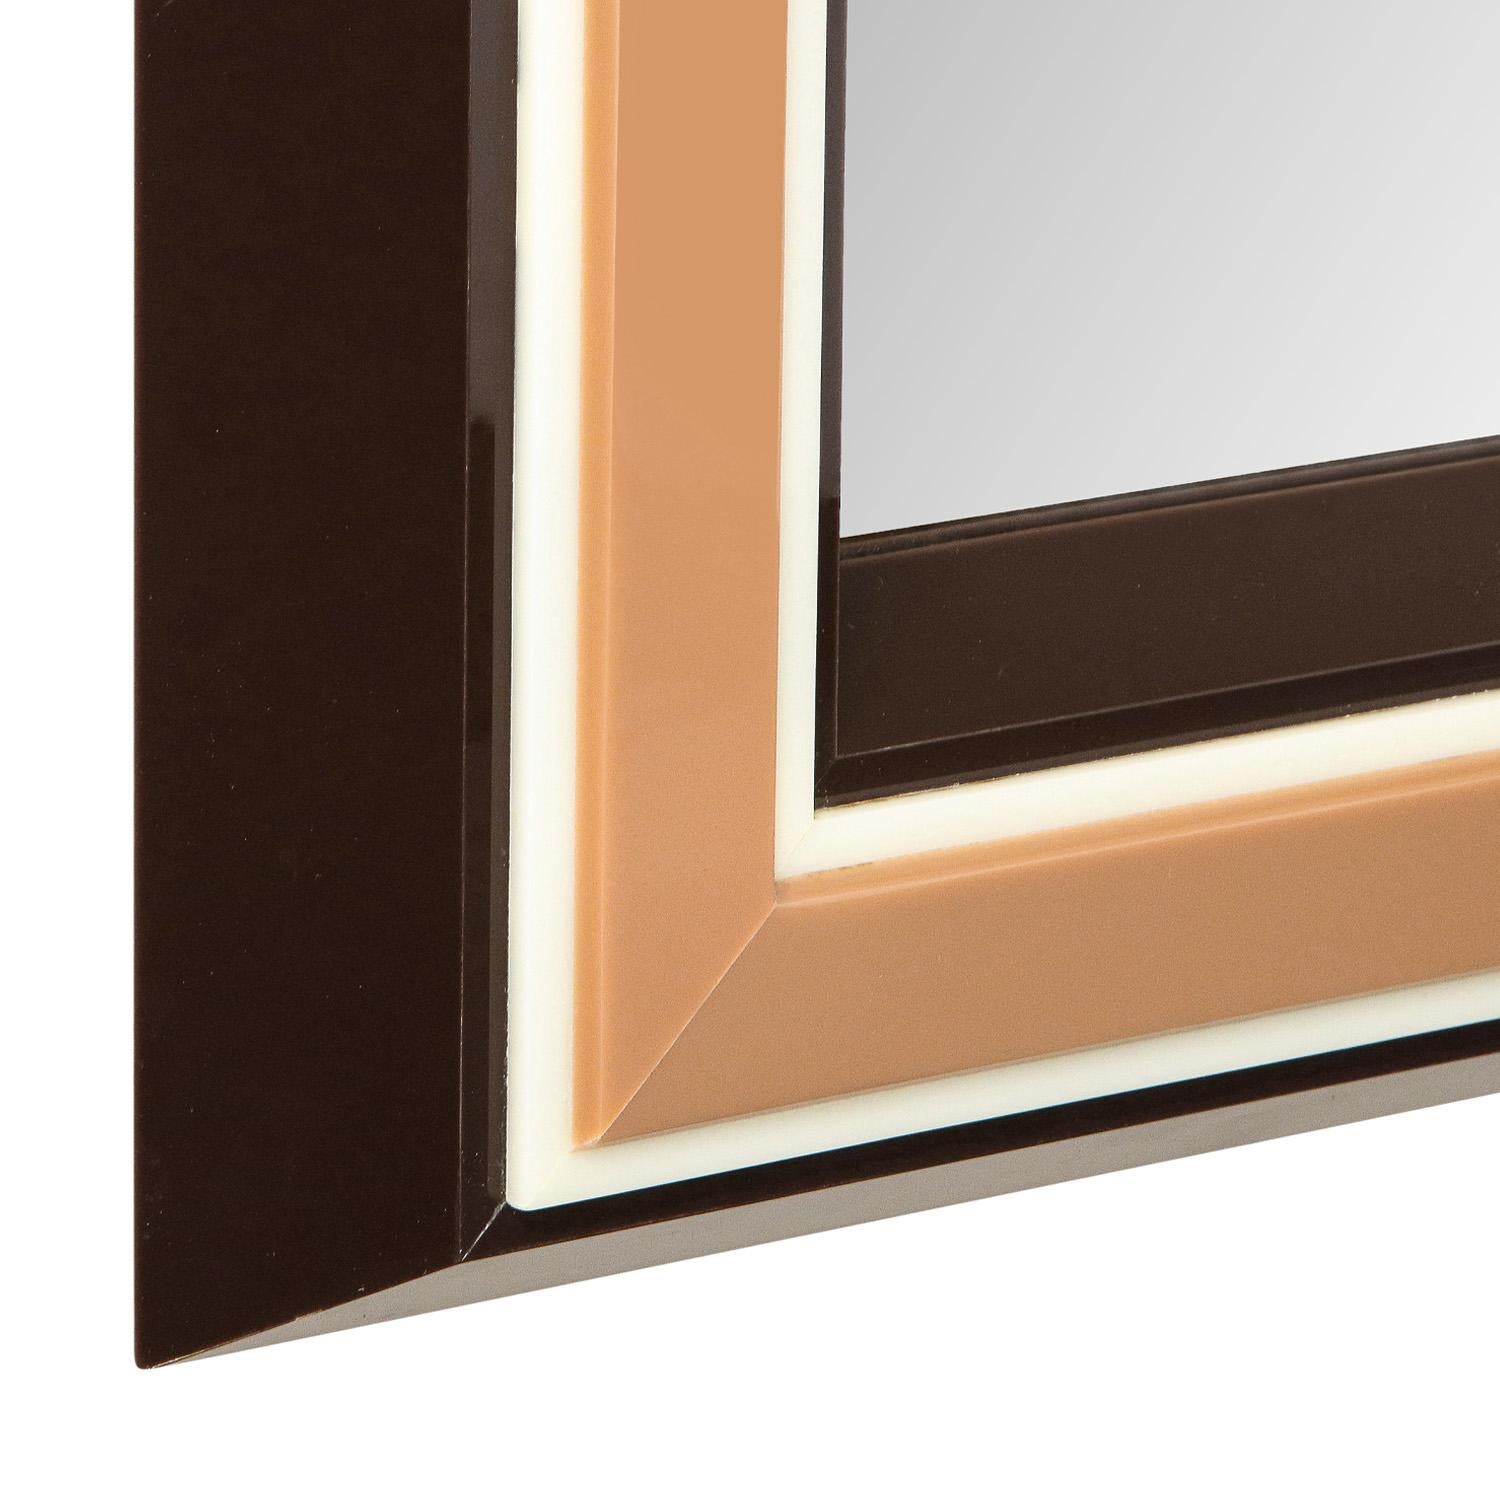 American Chic Les Prismatiques Mirror with Frame in Molded Lucite 1970s 'Signed' For Sale